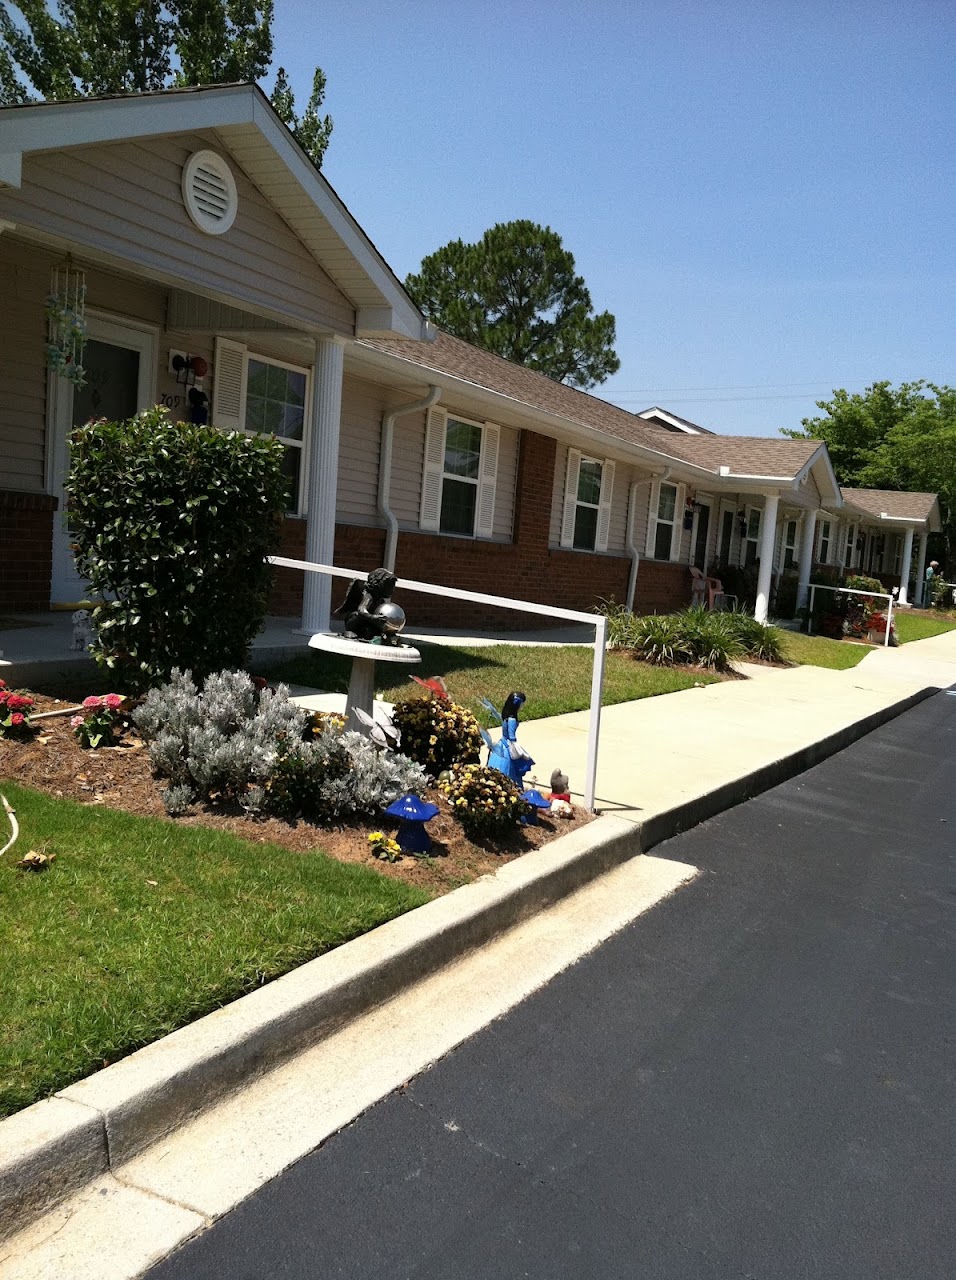 Photo of ANNADALE PARK. Affordable housing located at 611 GORDAY DR ASHBURN, GA 31714